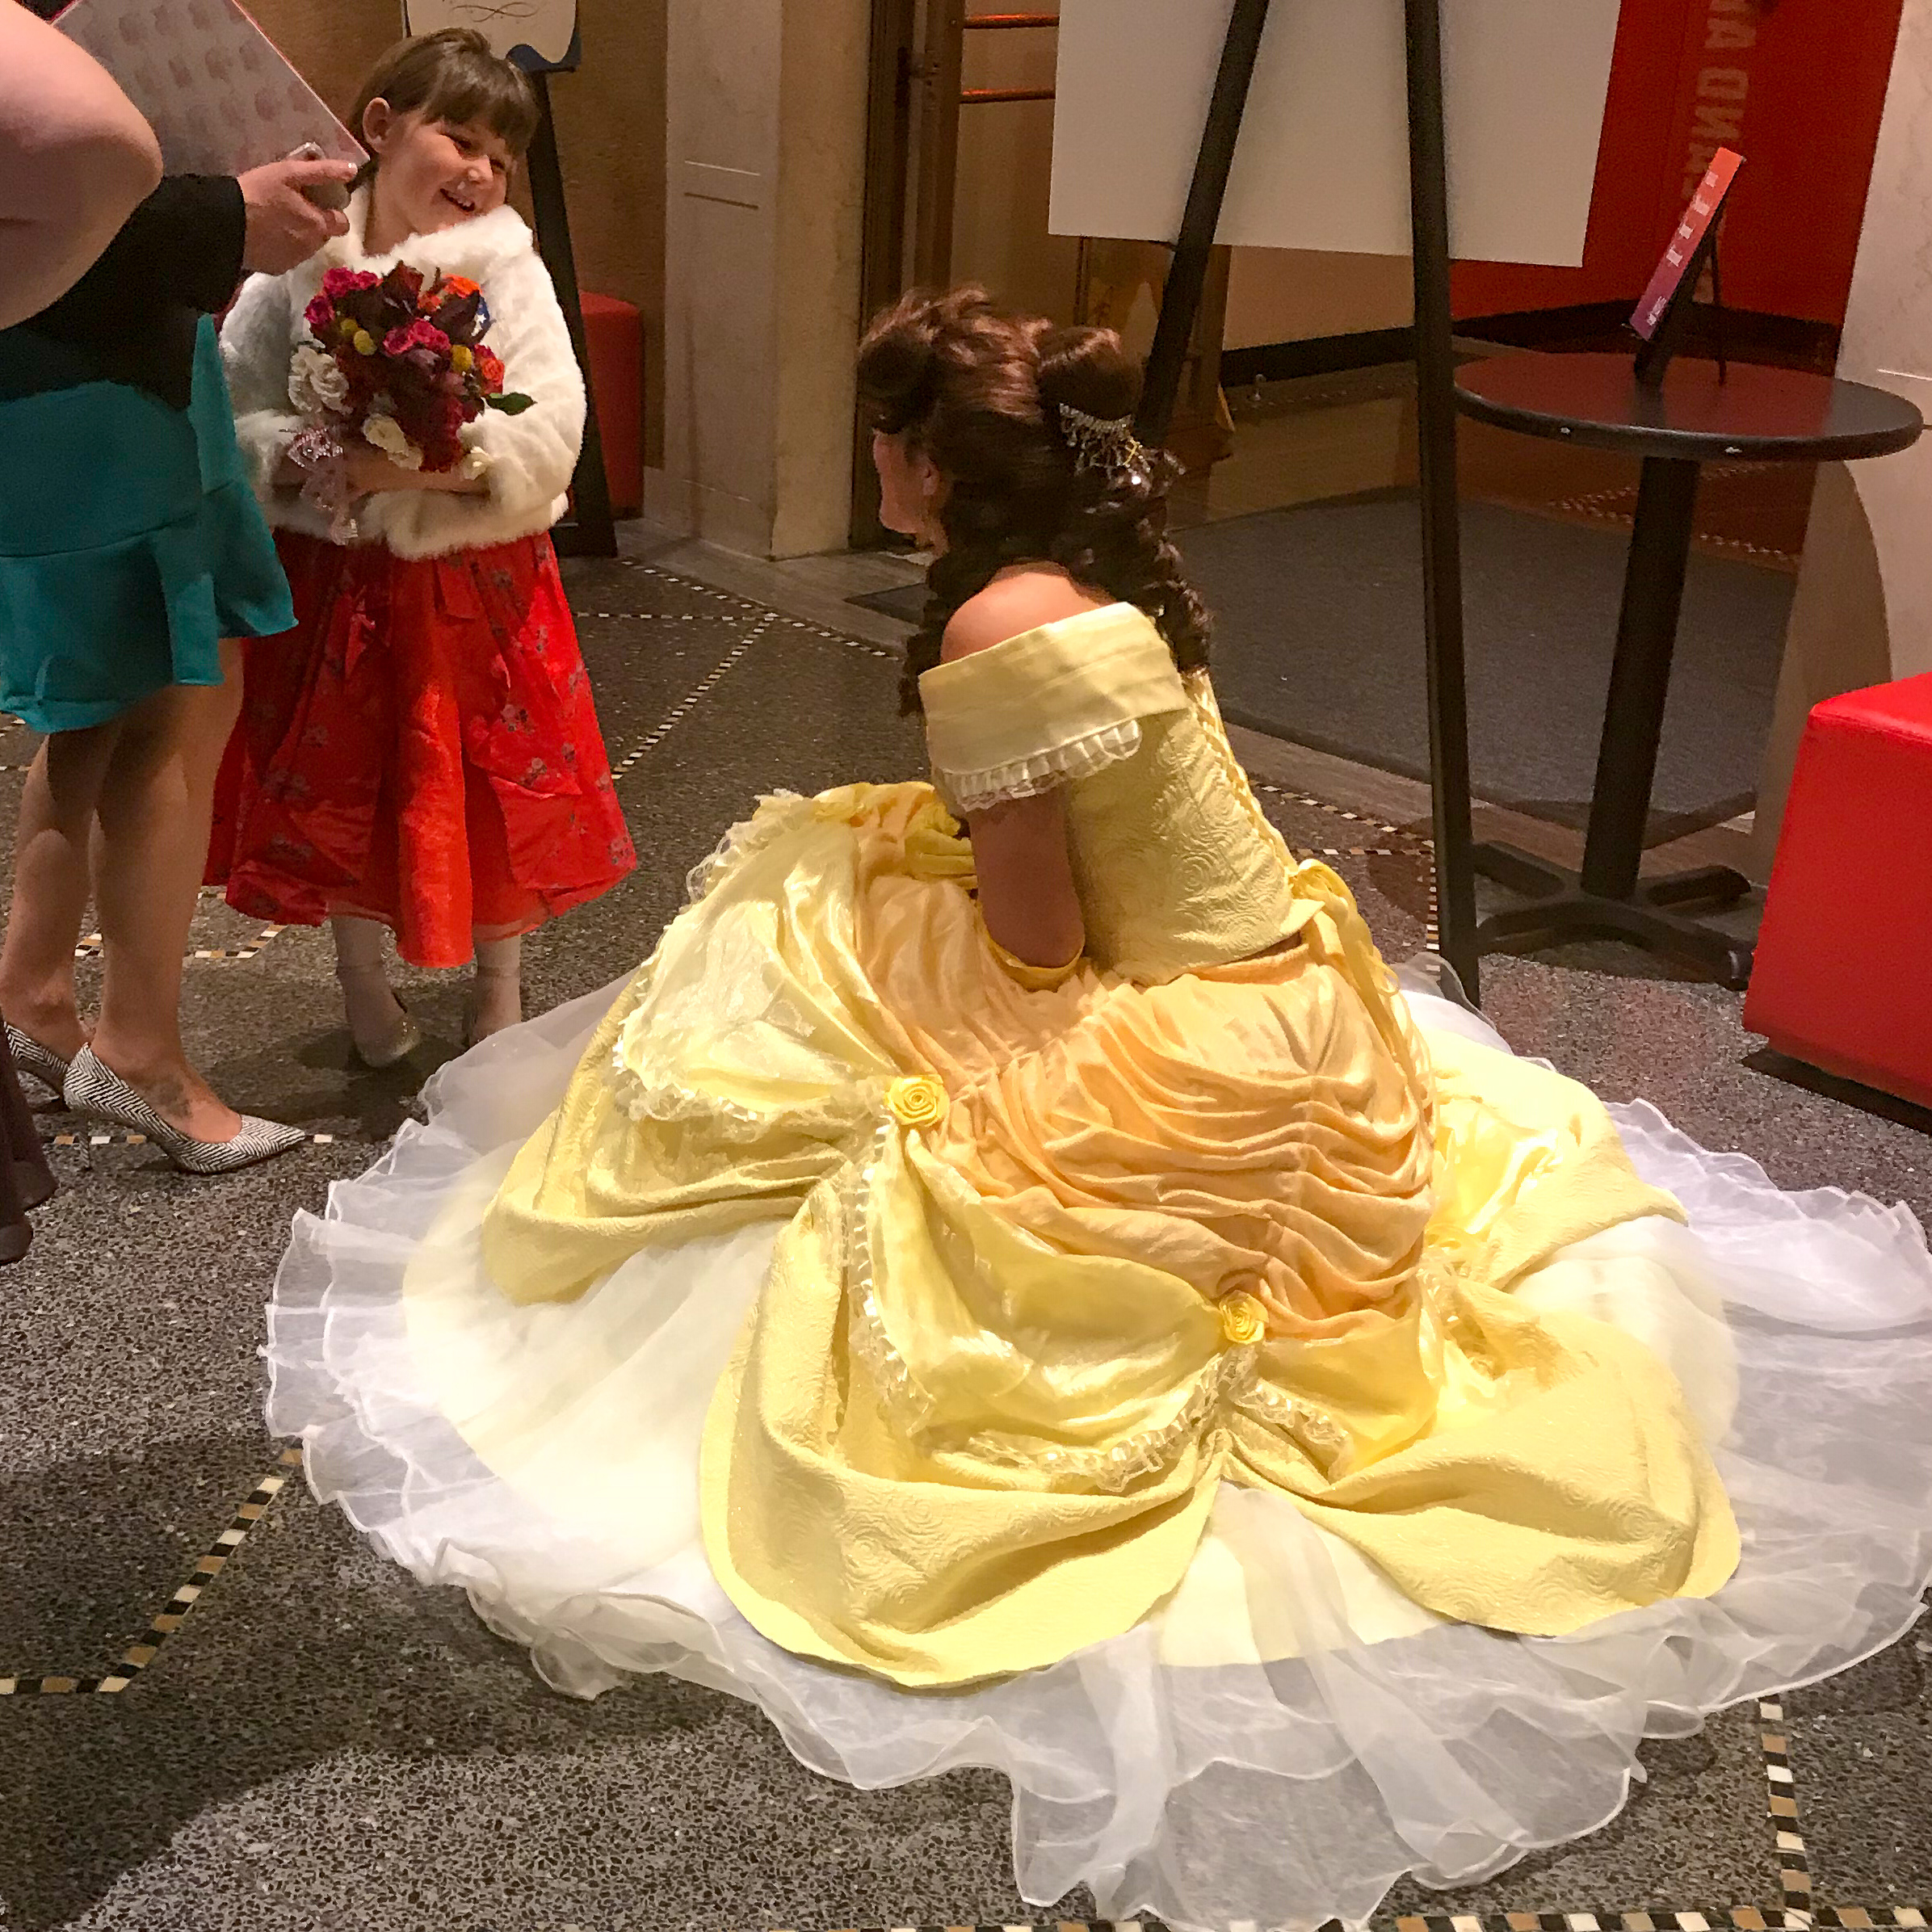 Belle and this beauty had a wonderful evening together at the ball!